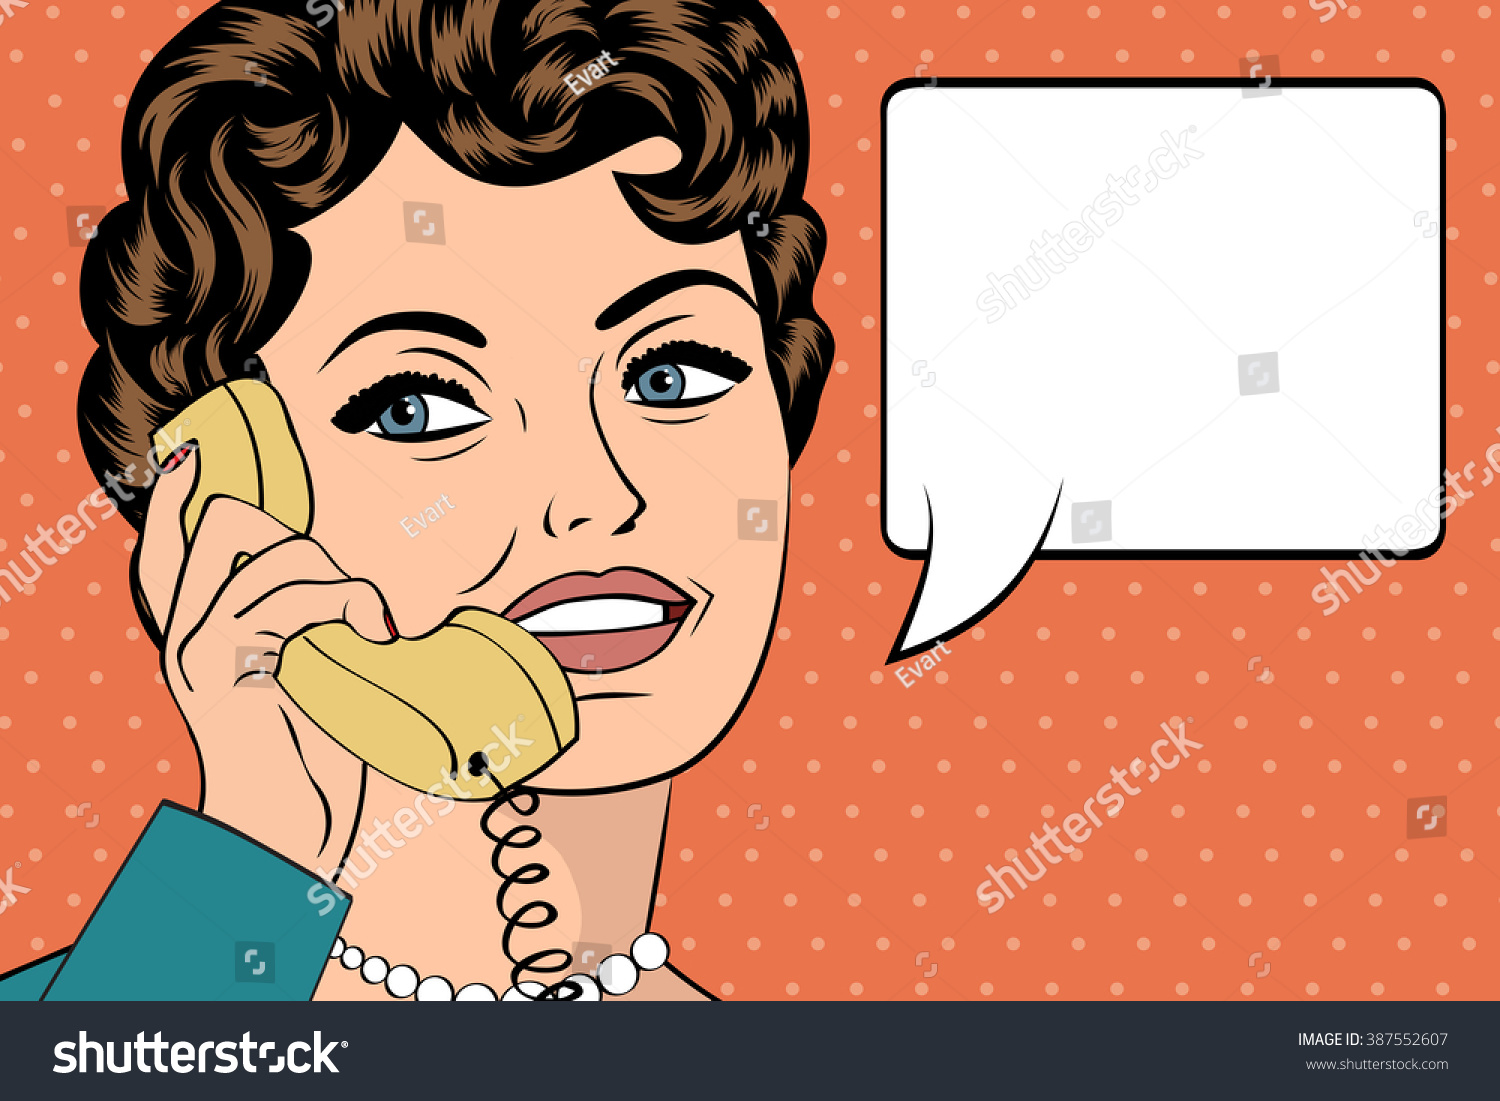 Woman Chatting On Phone Pop Art Stock Vector Royalty Free 387552607 Shutterstock 9199